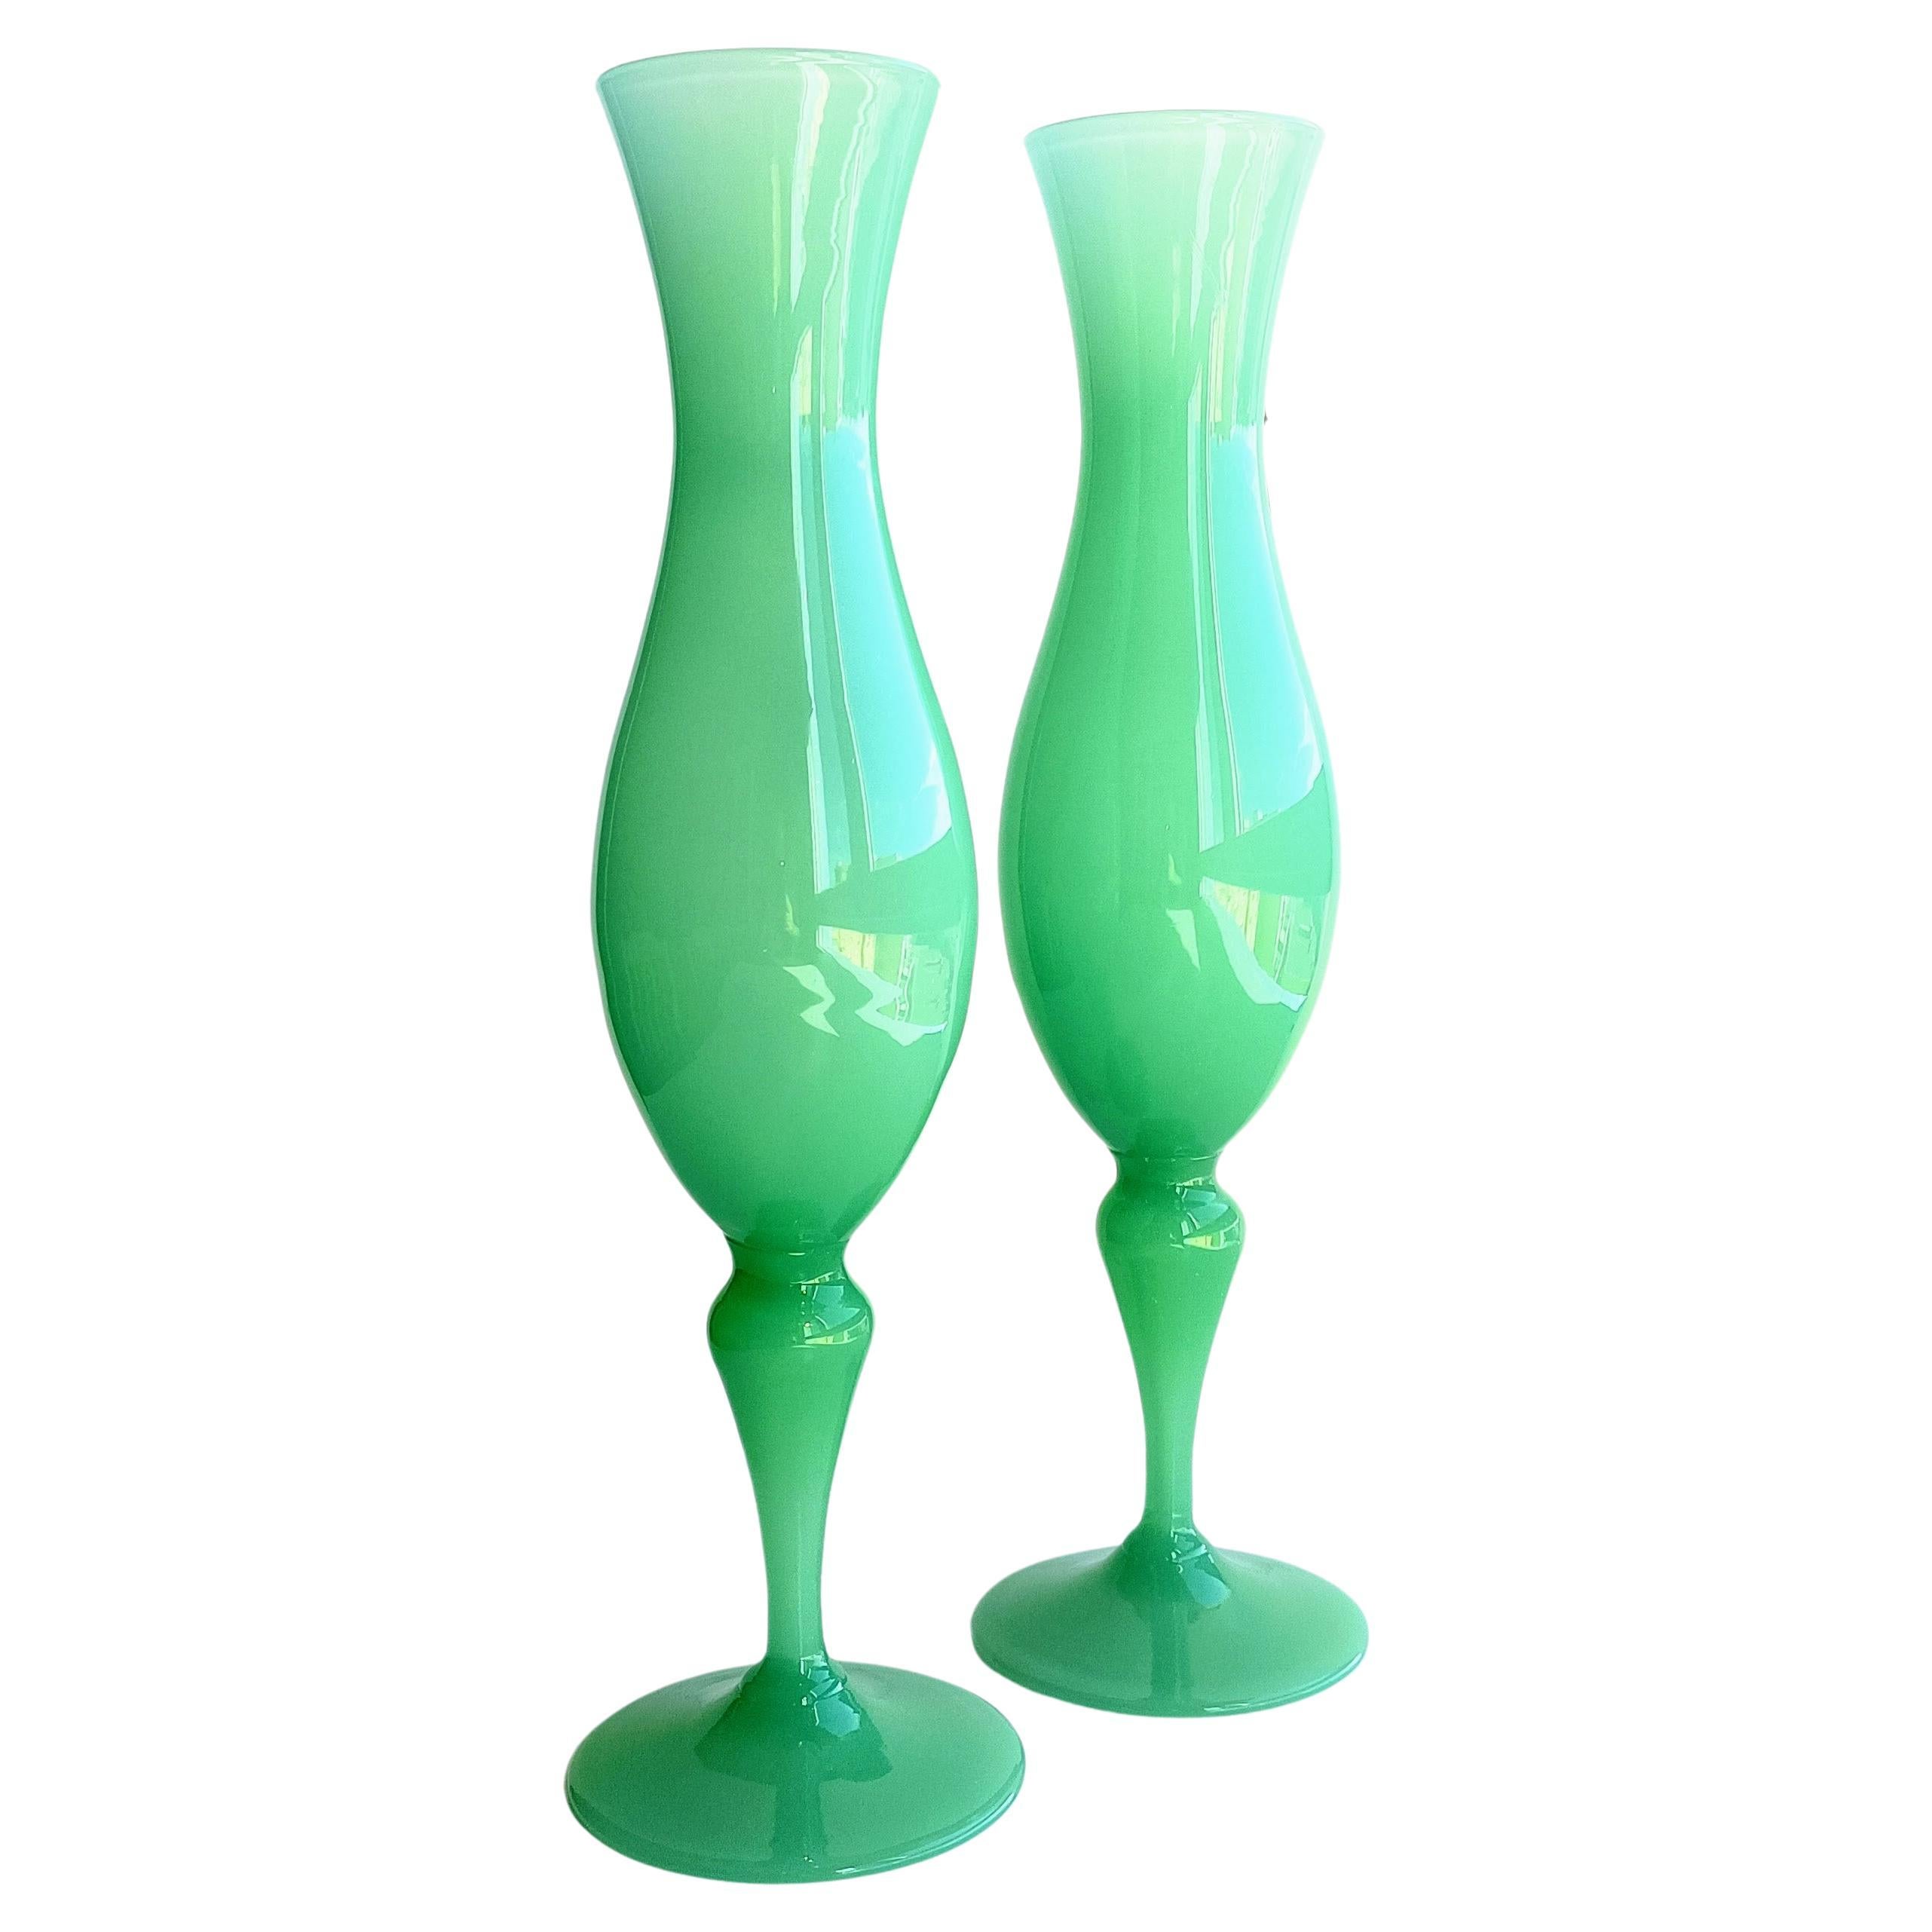 French Style Opaline florence Glas Labeled Pair of Mid Century Vases, 1960er Jahre im Angebot